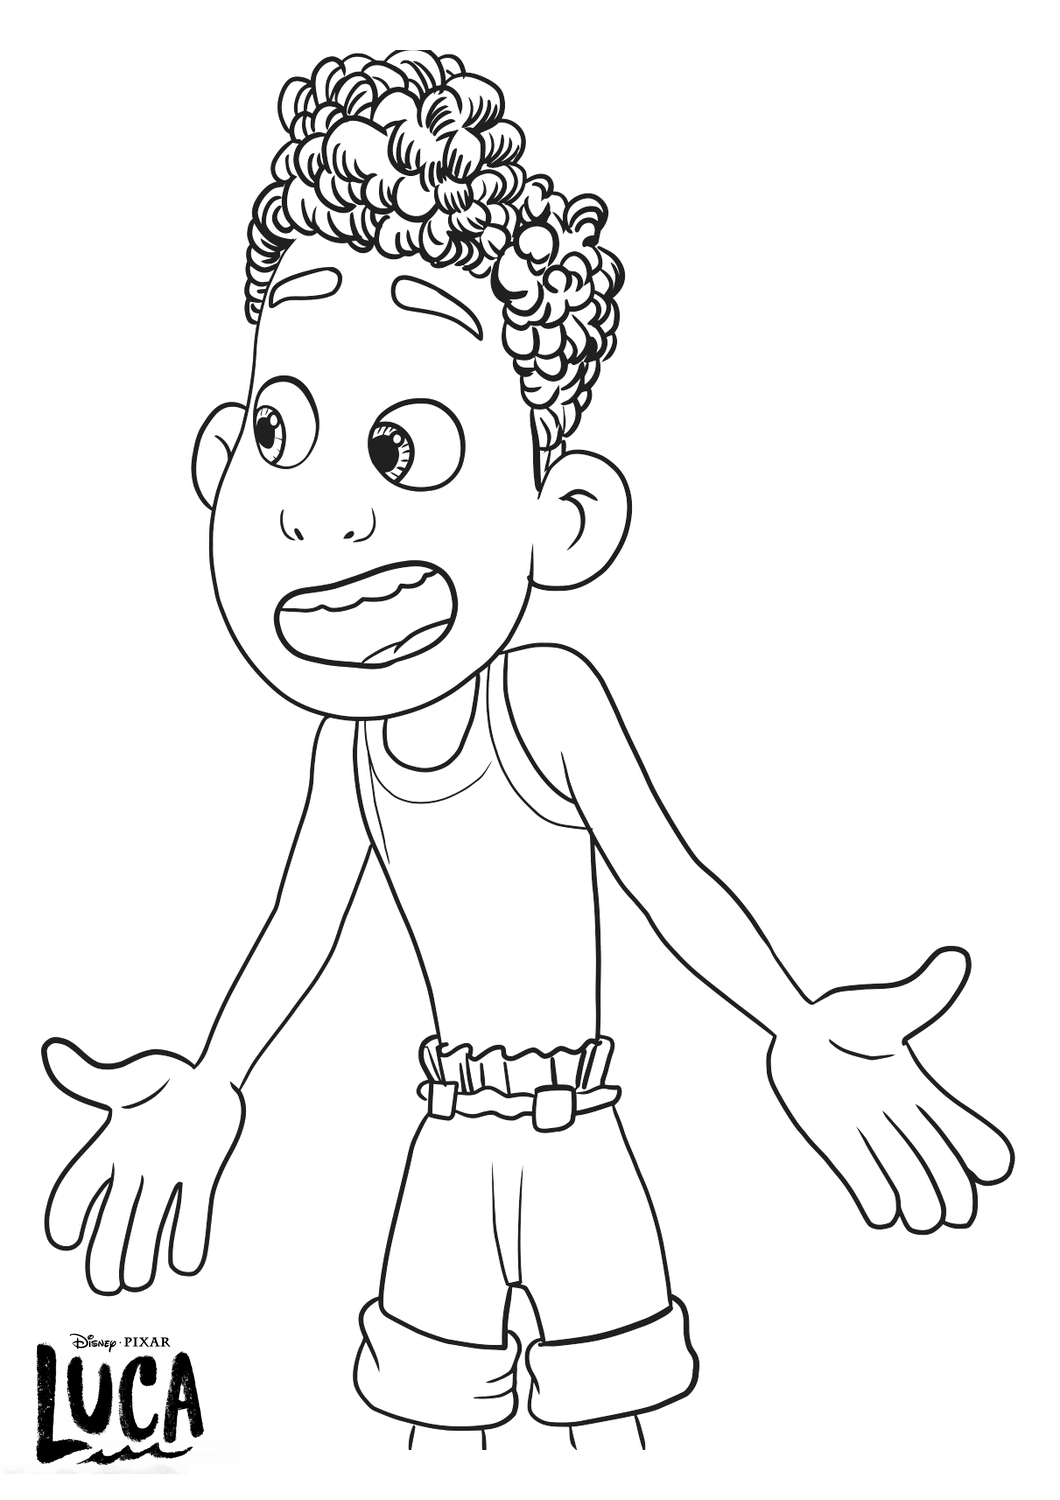 Alberto Luca Coloring Pages